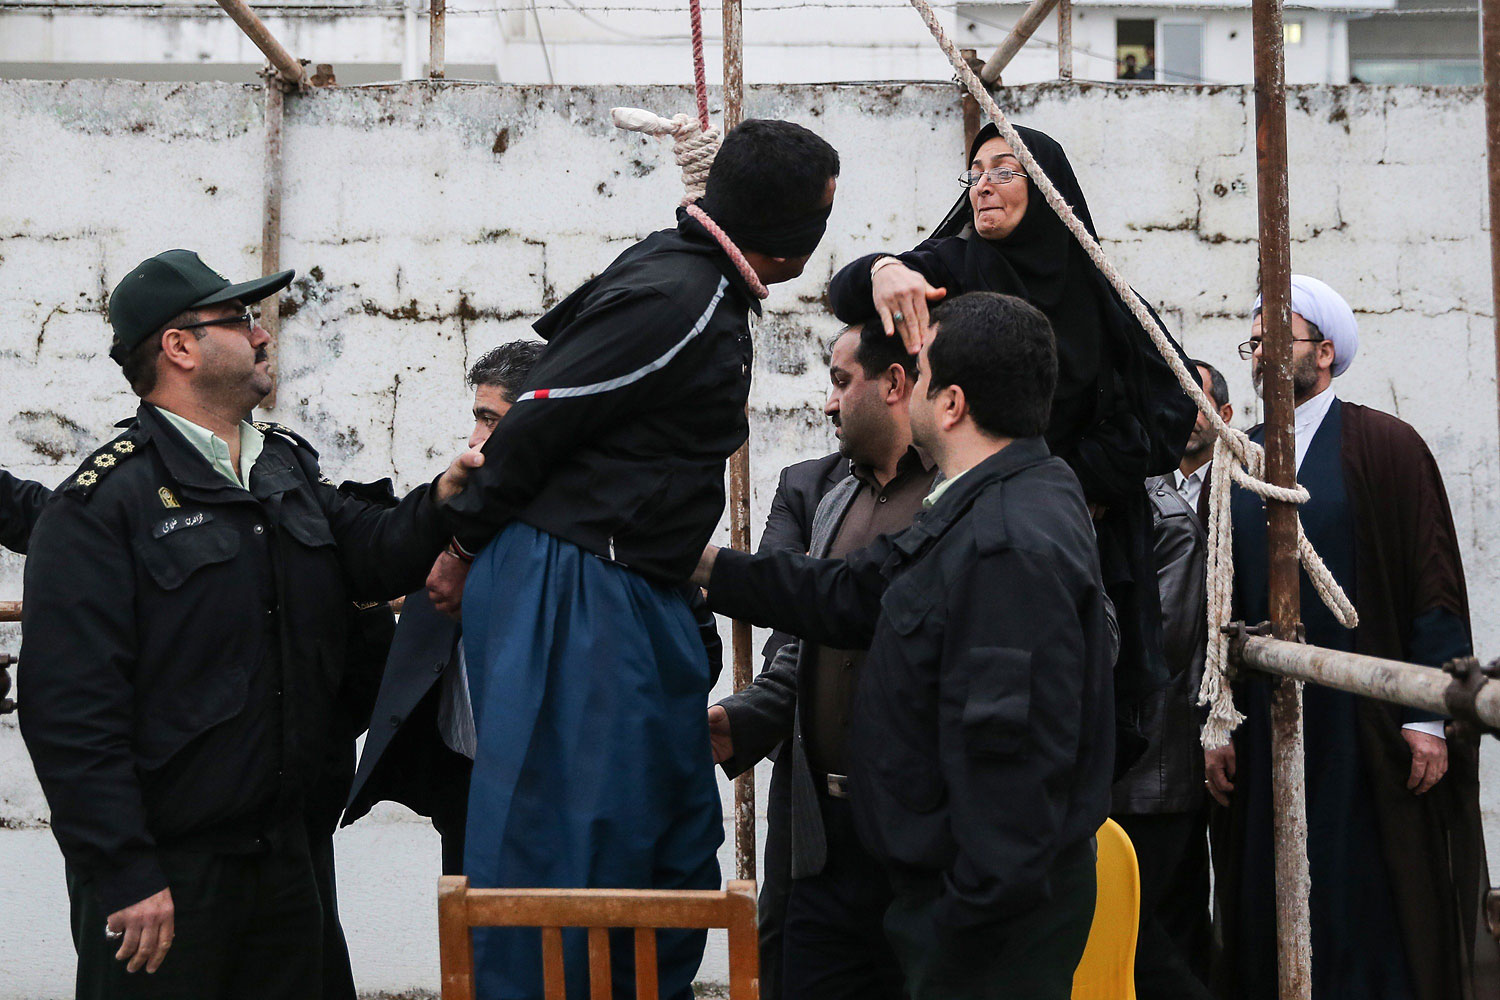 The mother of Abdolah Hosseinzadeh, who was murdered in 2007, slaps Balal who killed her son during the execution ceremony in the northern city of Nowshahr on April 15, 2014 just before she removed the noose around his neck with the help of her husband, sparing the life of her son's convicted murderer.